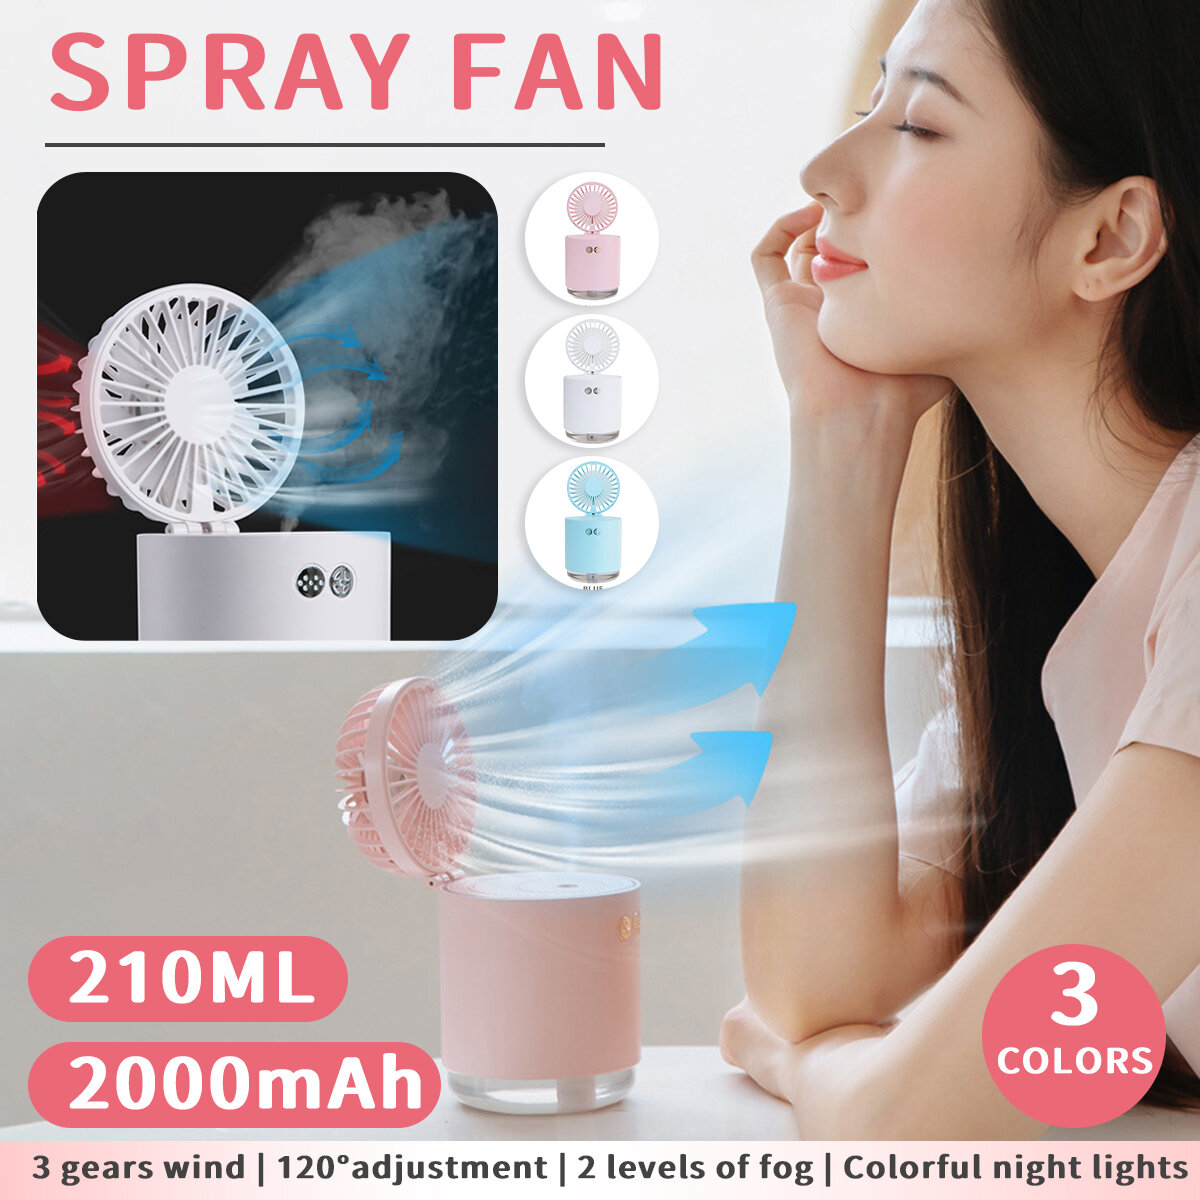 Multifunctional 2000mAh Mini USB Rechargeable Fan Cooler Desktop Spray Humidification with Colorful 